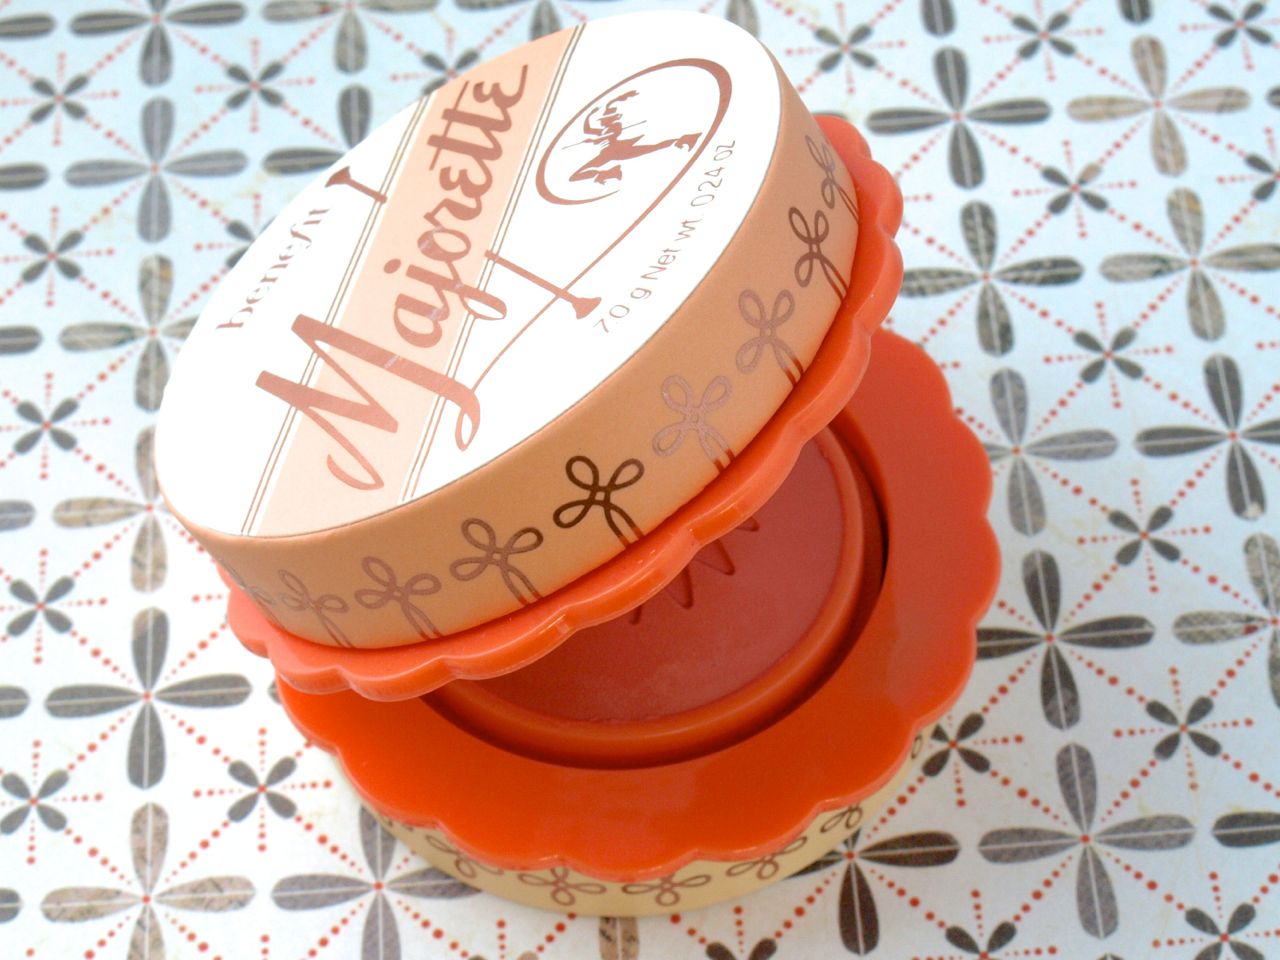 Benefit Majorette Cream-to-Powder Booster Blush: Review and Swatches